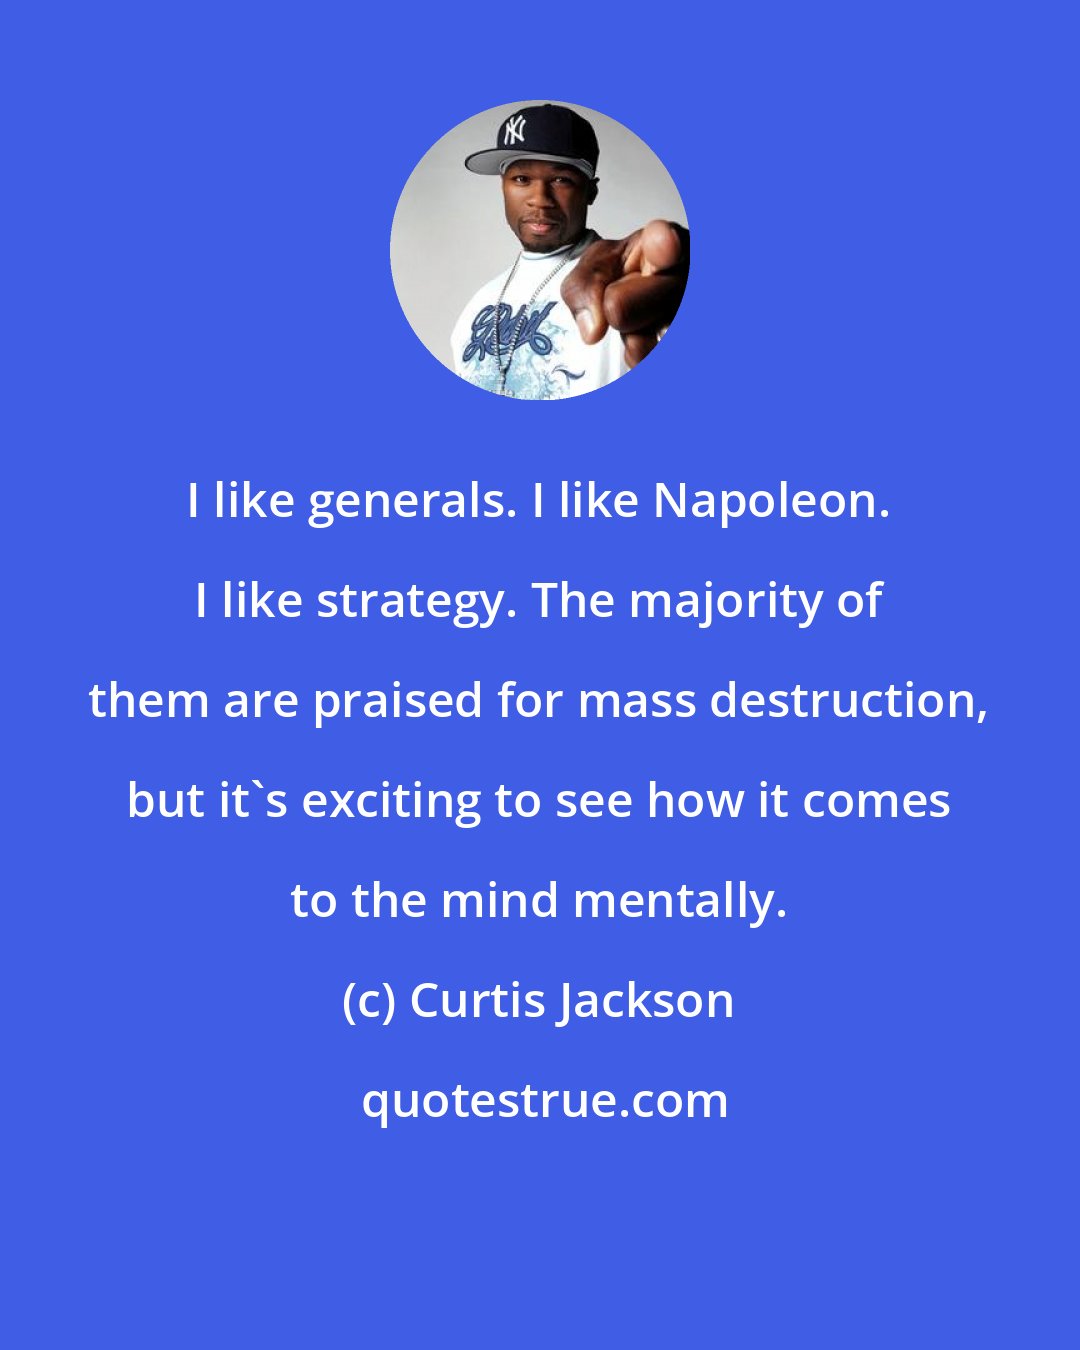 Curtis Jackson: I like generals. I like Napoleon. I like strategy. The majority of them are praised for mass destruction, but it's exciting to see how it comes to the mind mentally.